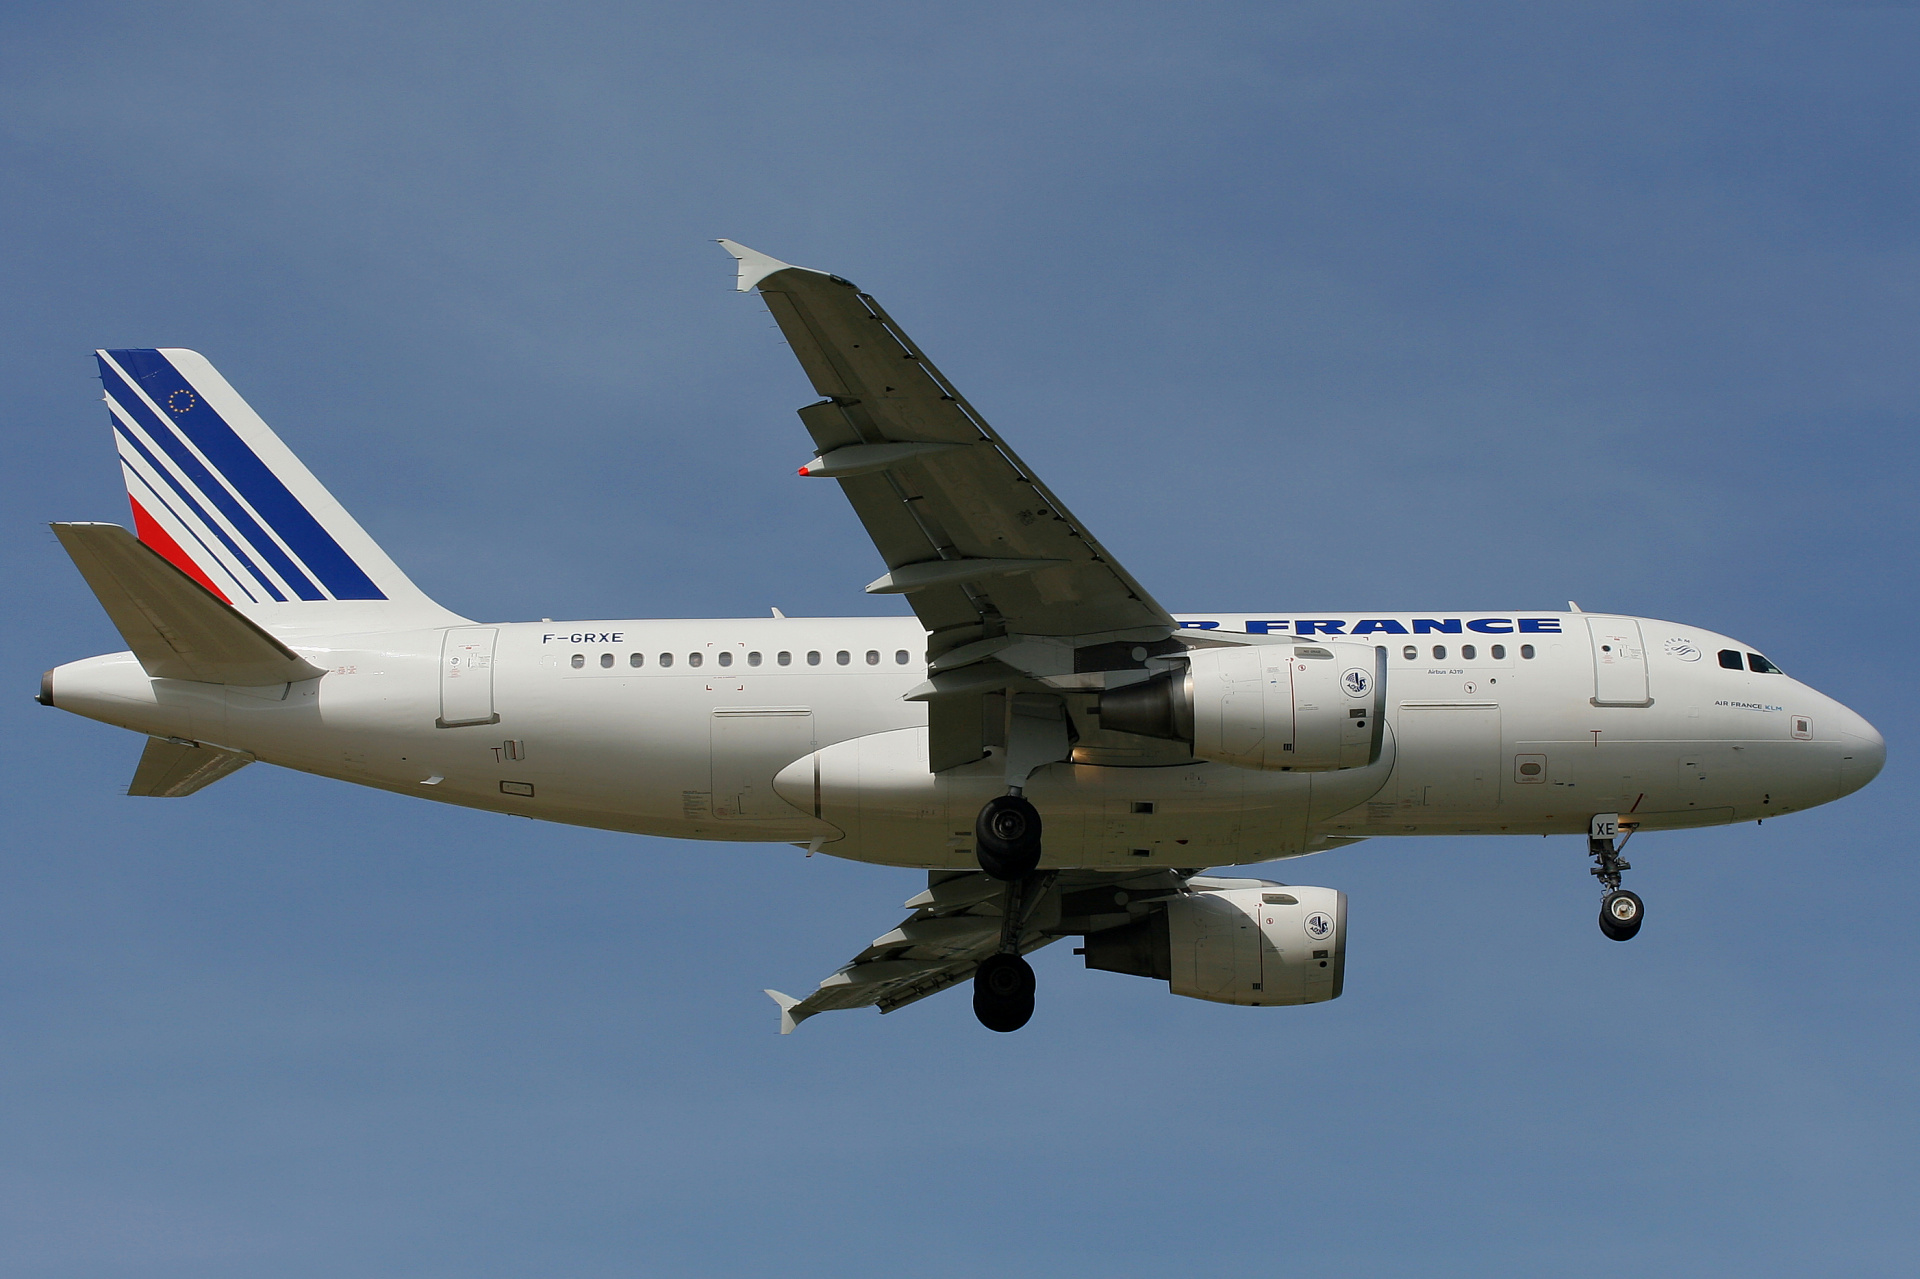 F-GRXE (Aircraft » EPWA Spotting » Airbus A319-100 » Air France)